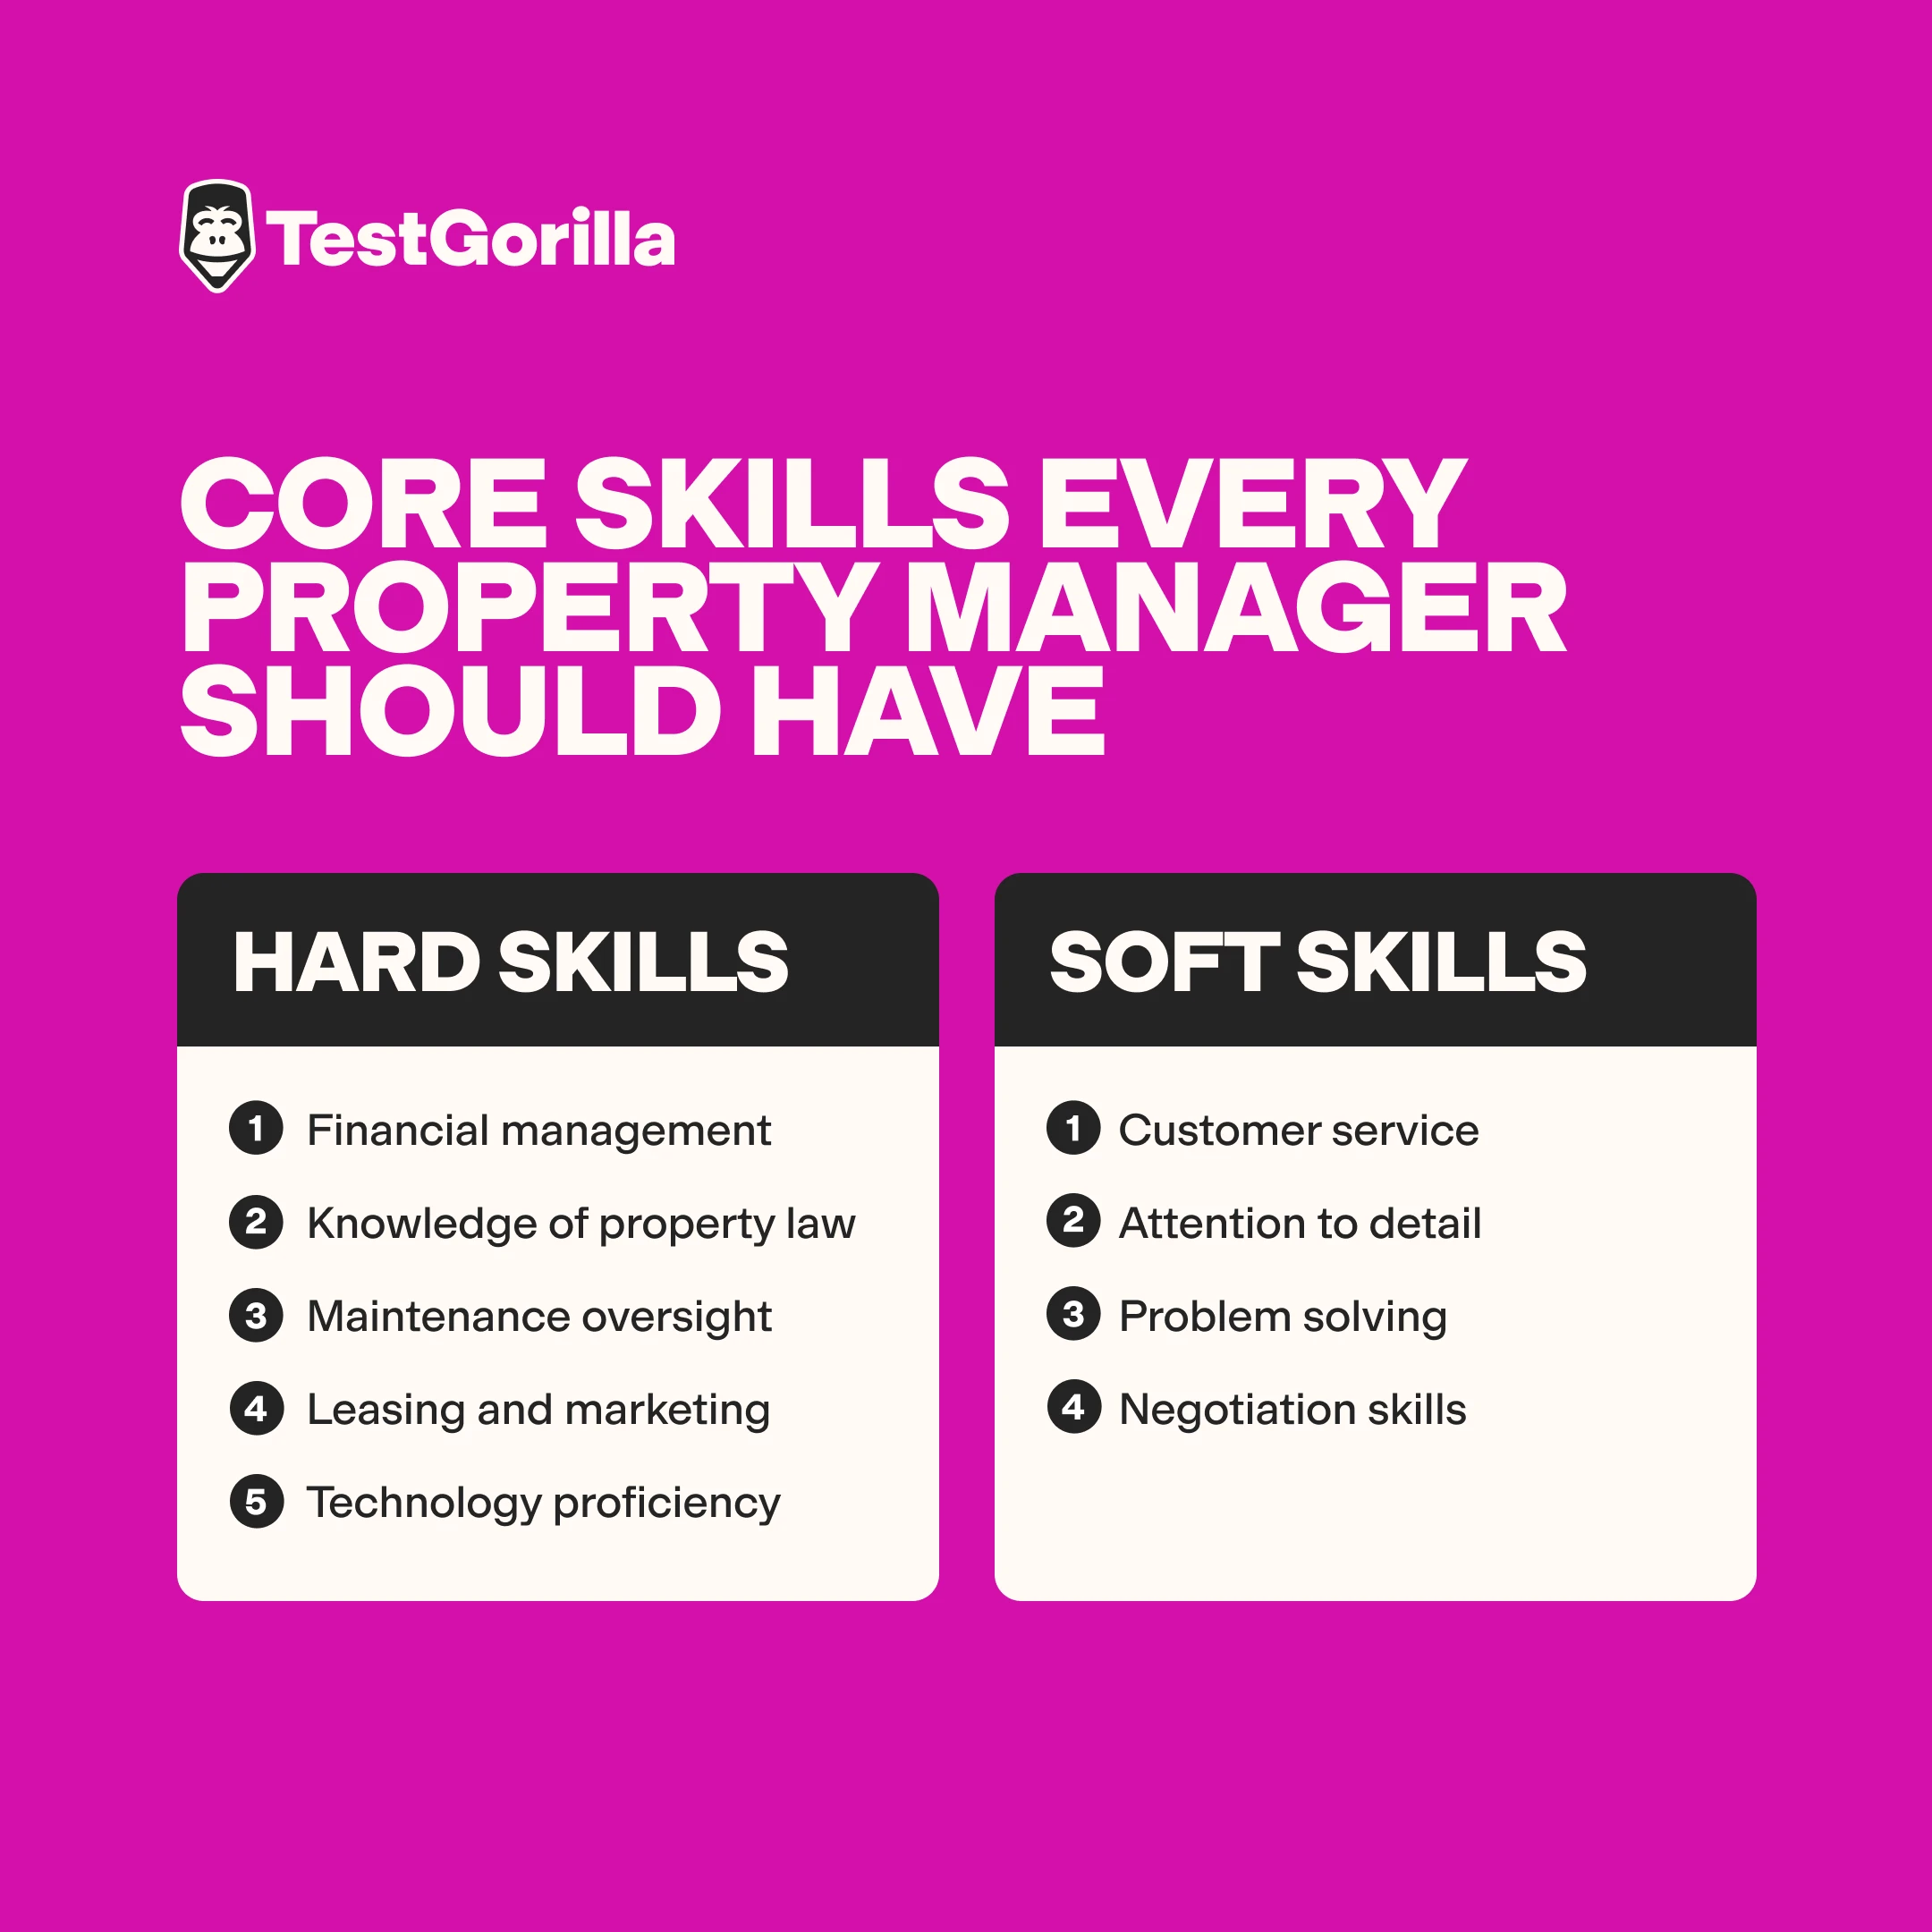 Core skills every property manager should have graphic